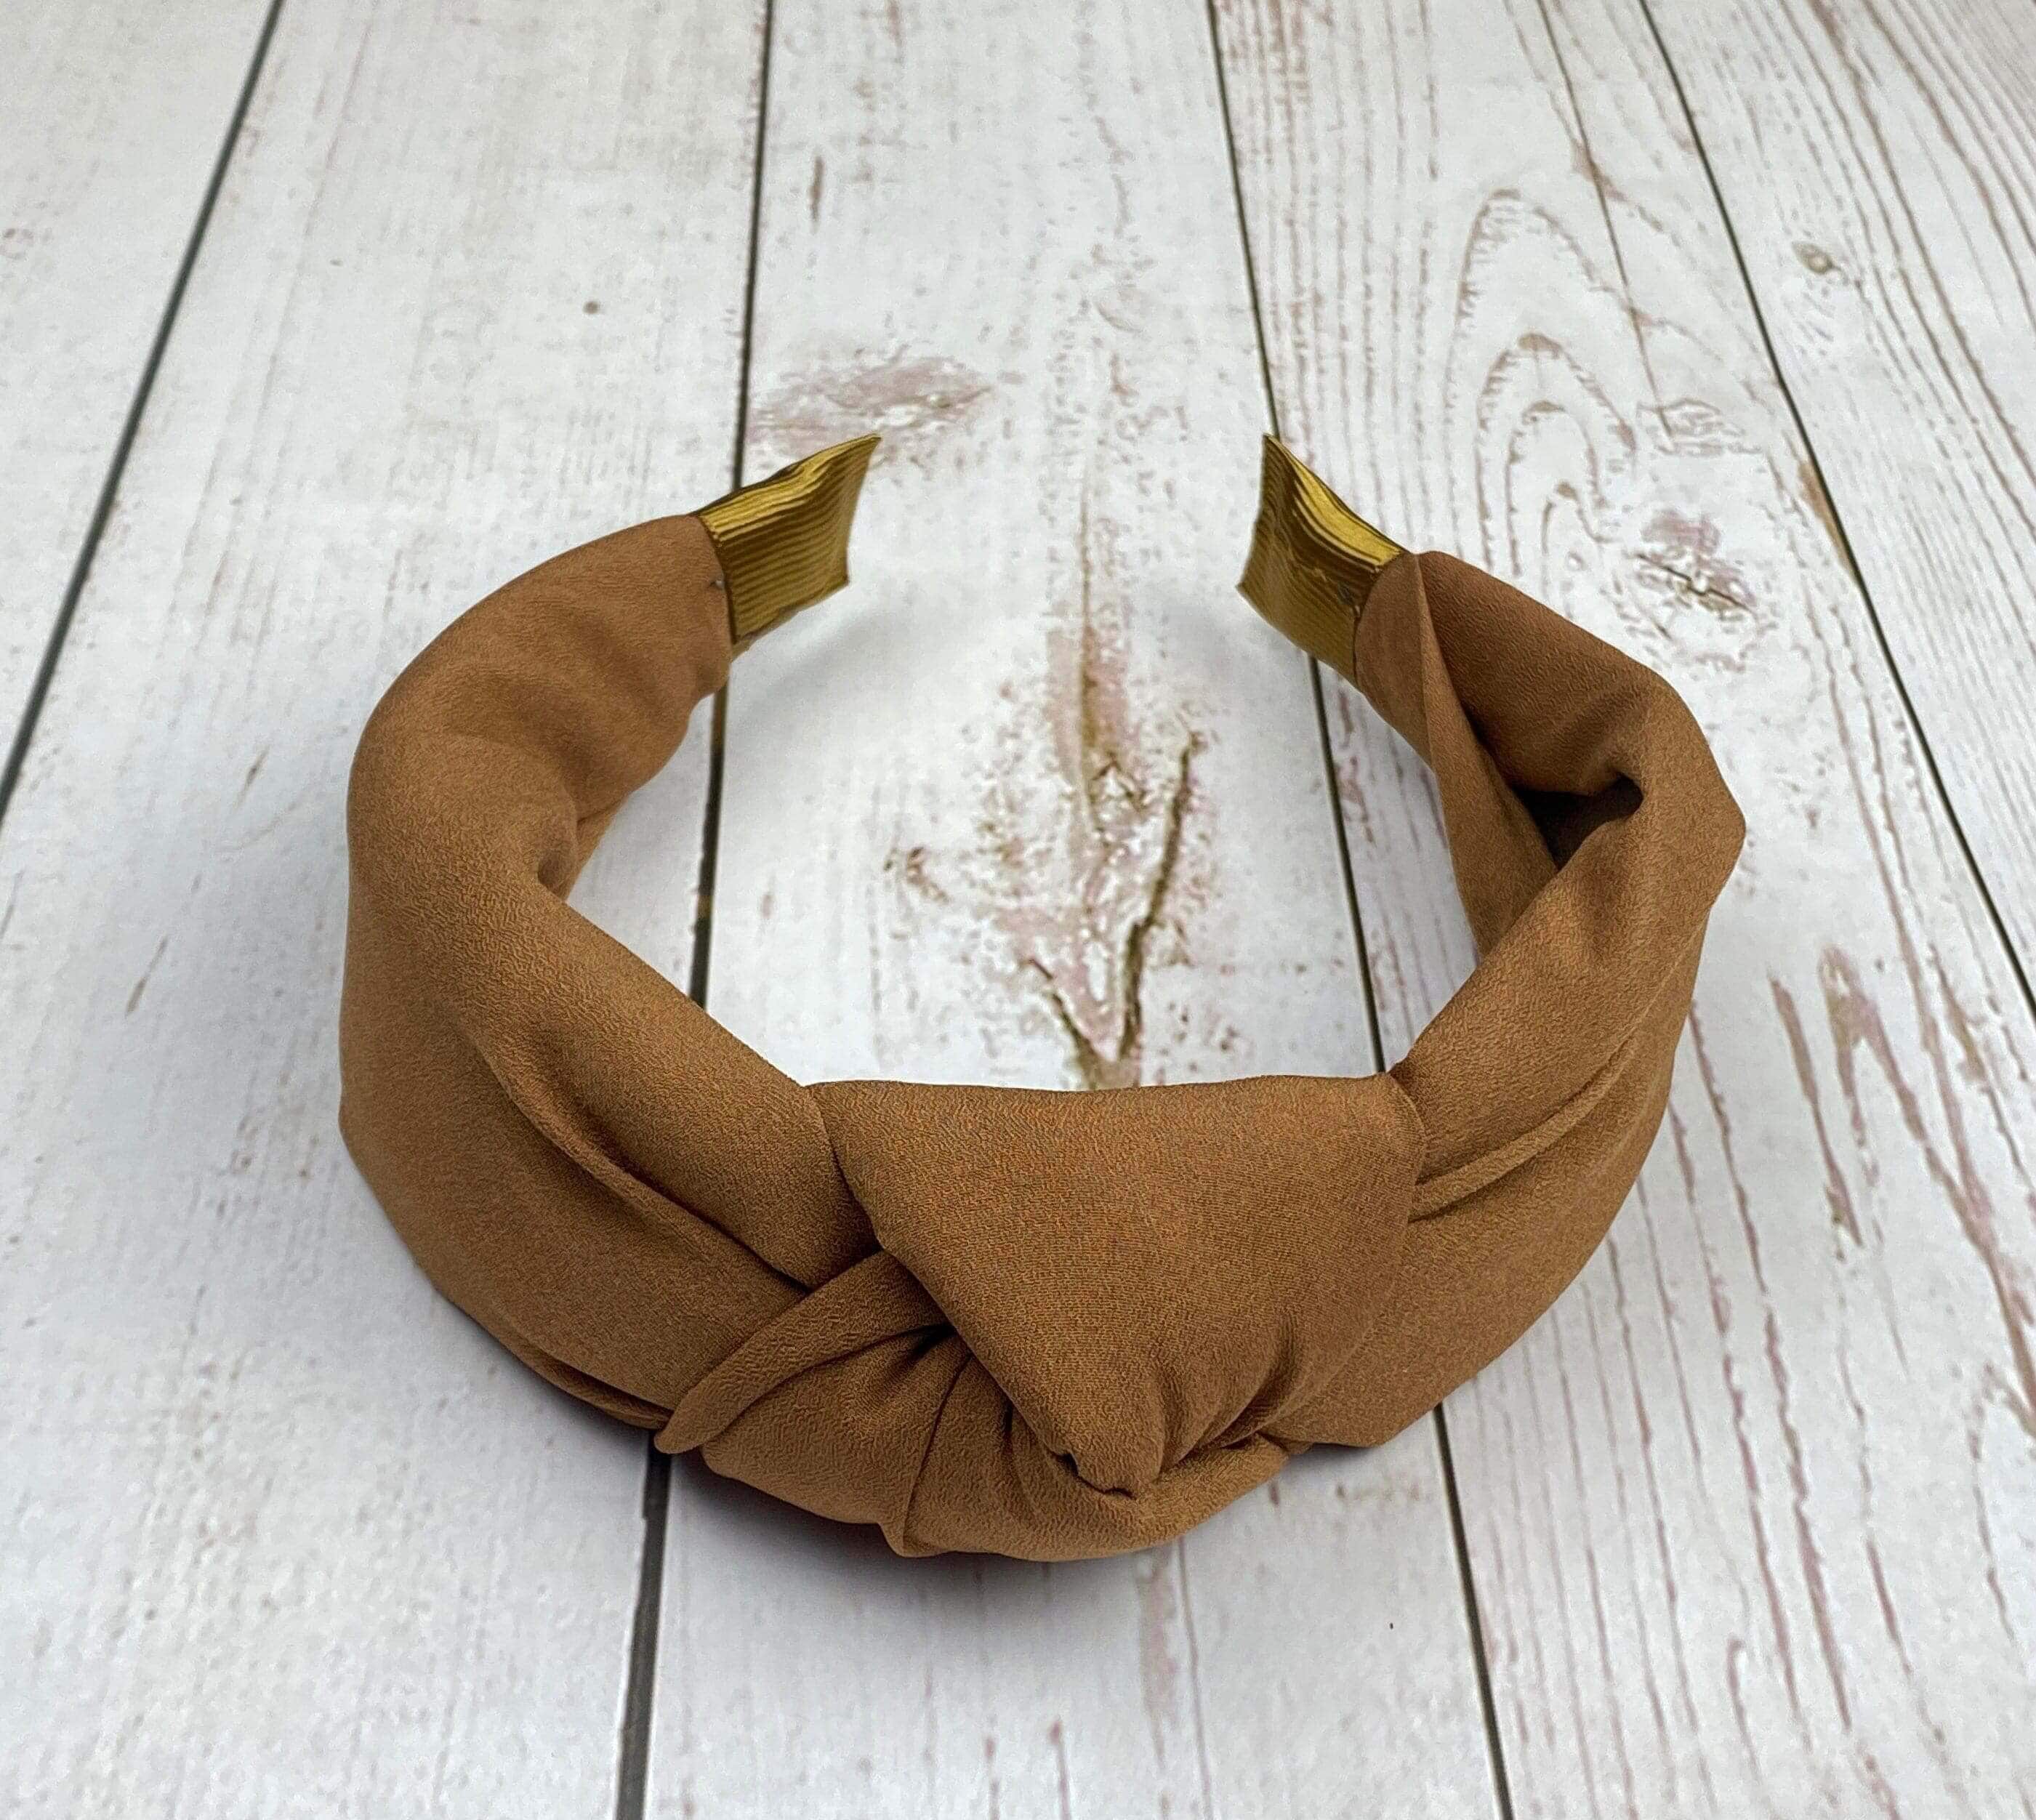 Add a touch of sweetness to your style with Knotted Women Fashionable Headband! Made from soft, light, and comfortable viscose crepe, this headband will keep your hair looking its best all day long.